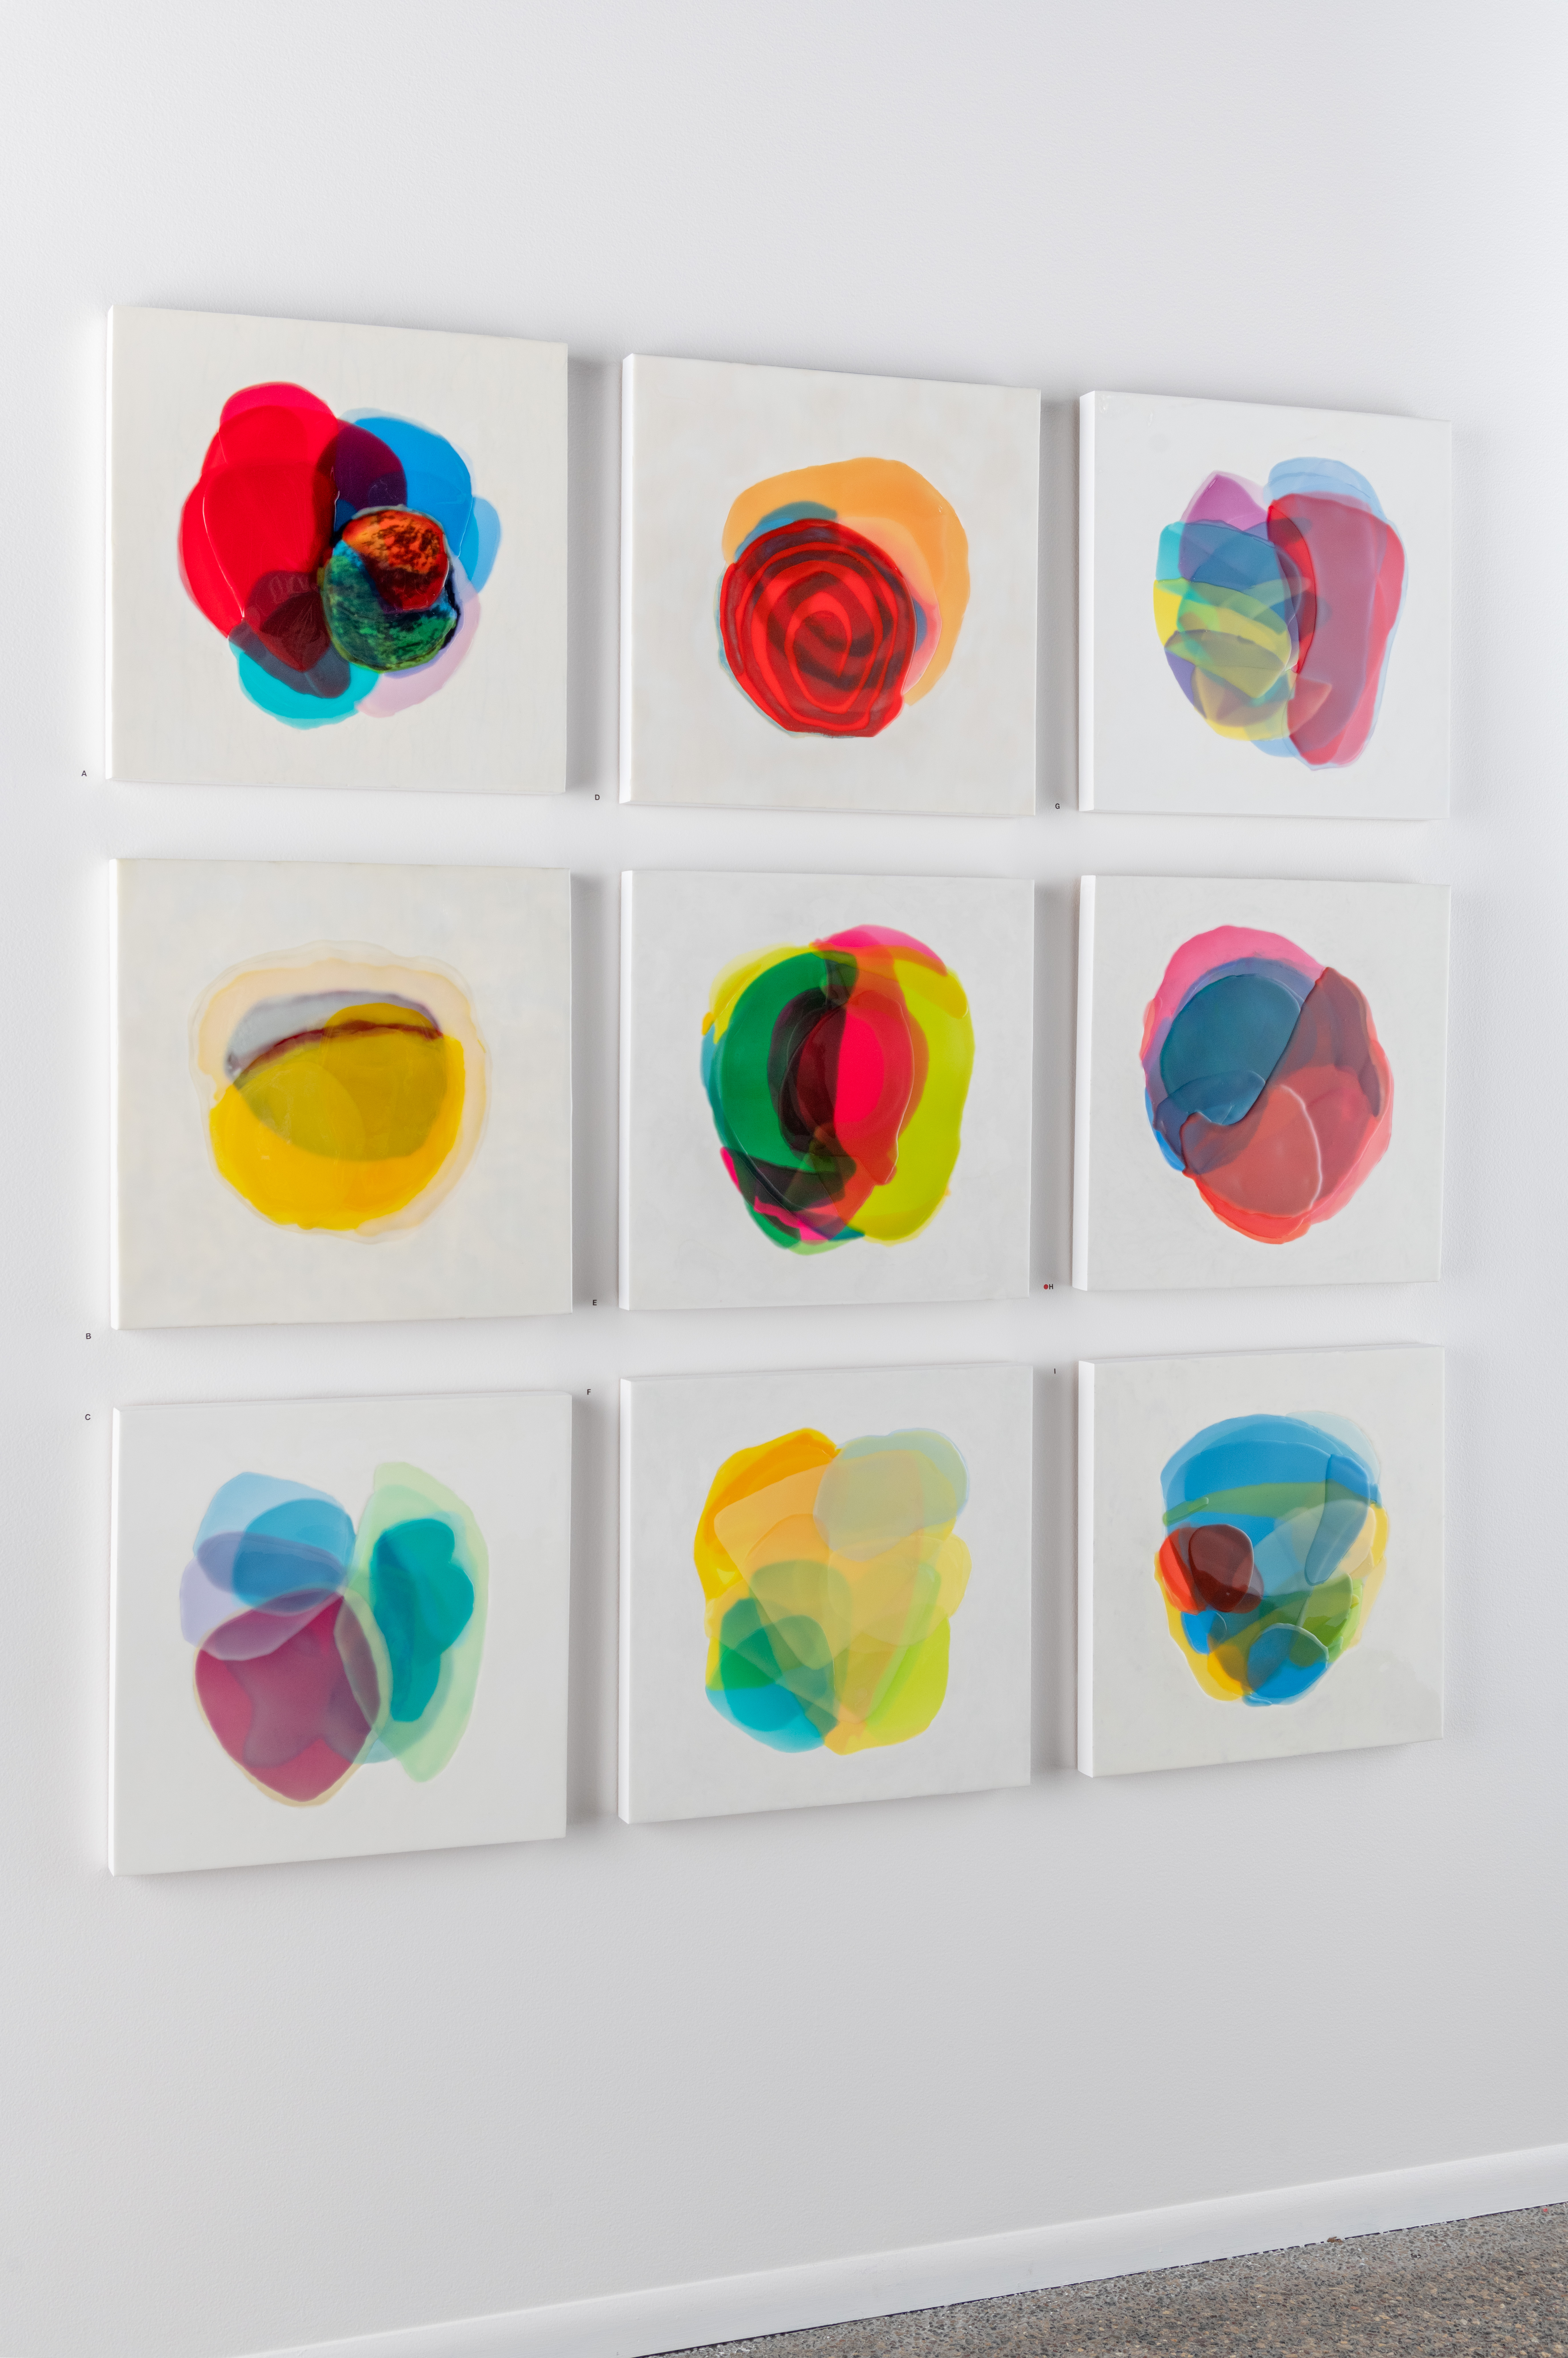 Wall of nine paintings each with colorful abstract forms on white backgrounds by Farida Hughes